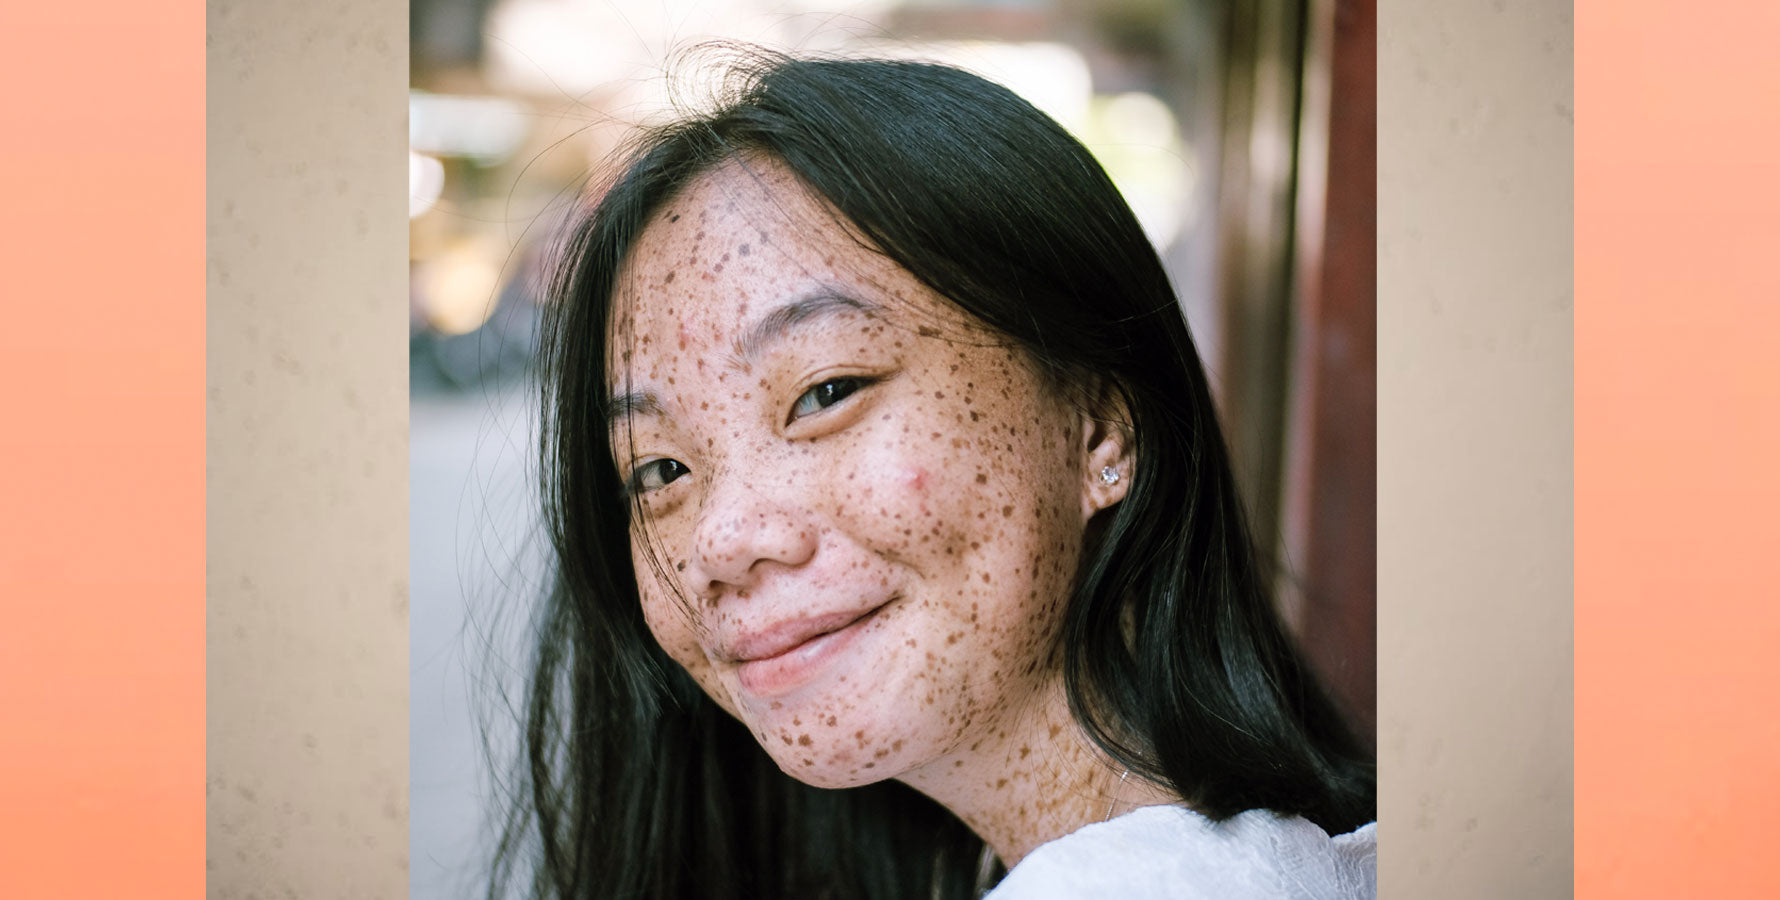 Newspapers may not love us, but CERM skin delivers. Image: Pexels.com/Ike Louis Natividad